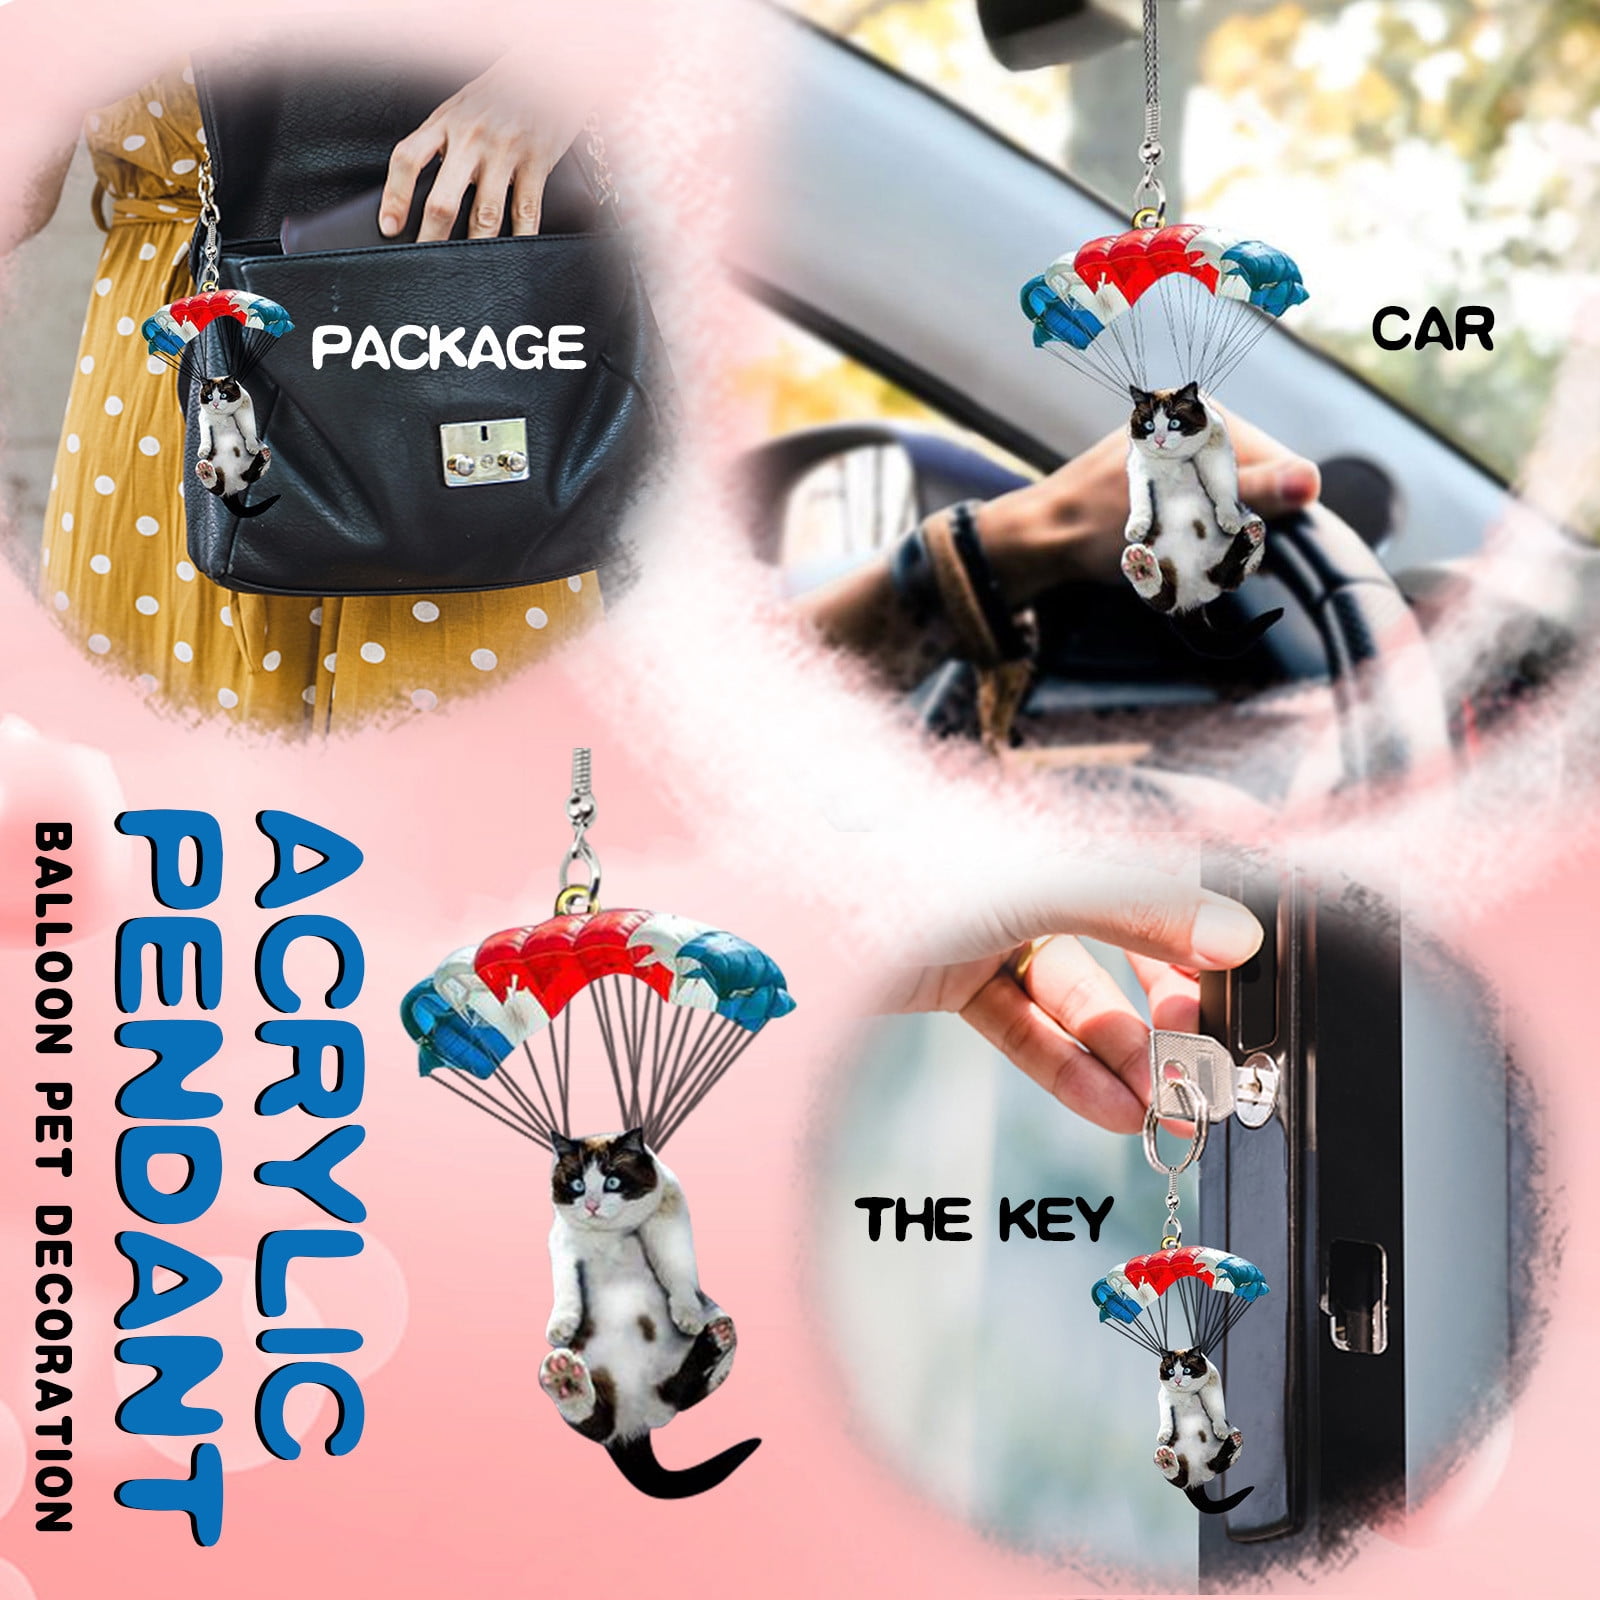 Details about   Car Cute Gog Hanging Ornament With Colorful Aerosphere Hanging Ornament Gift New 